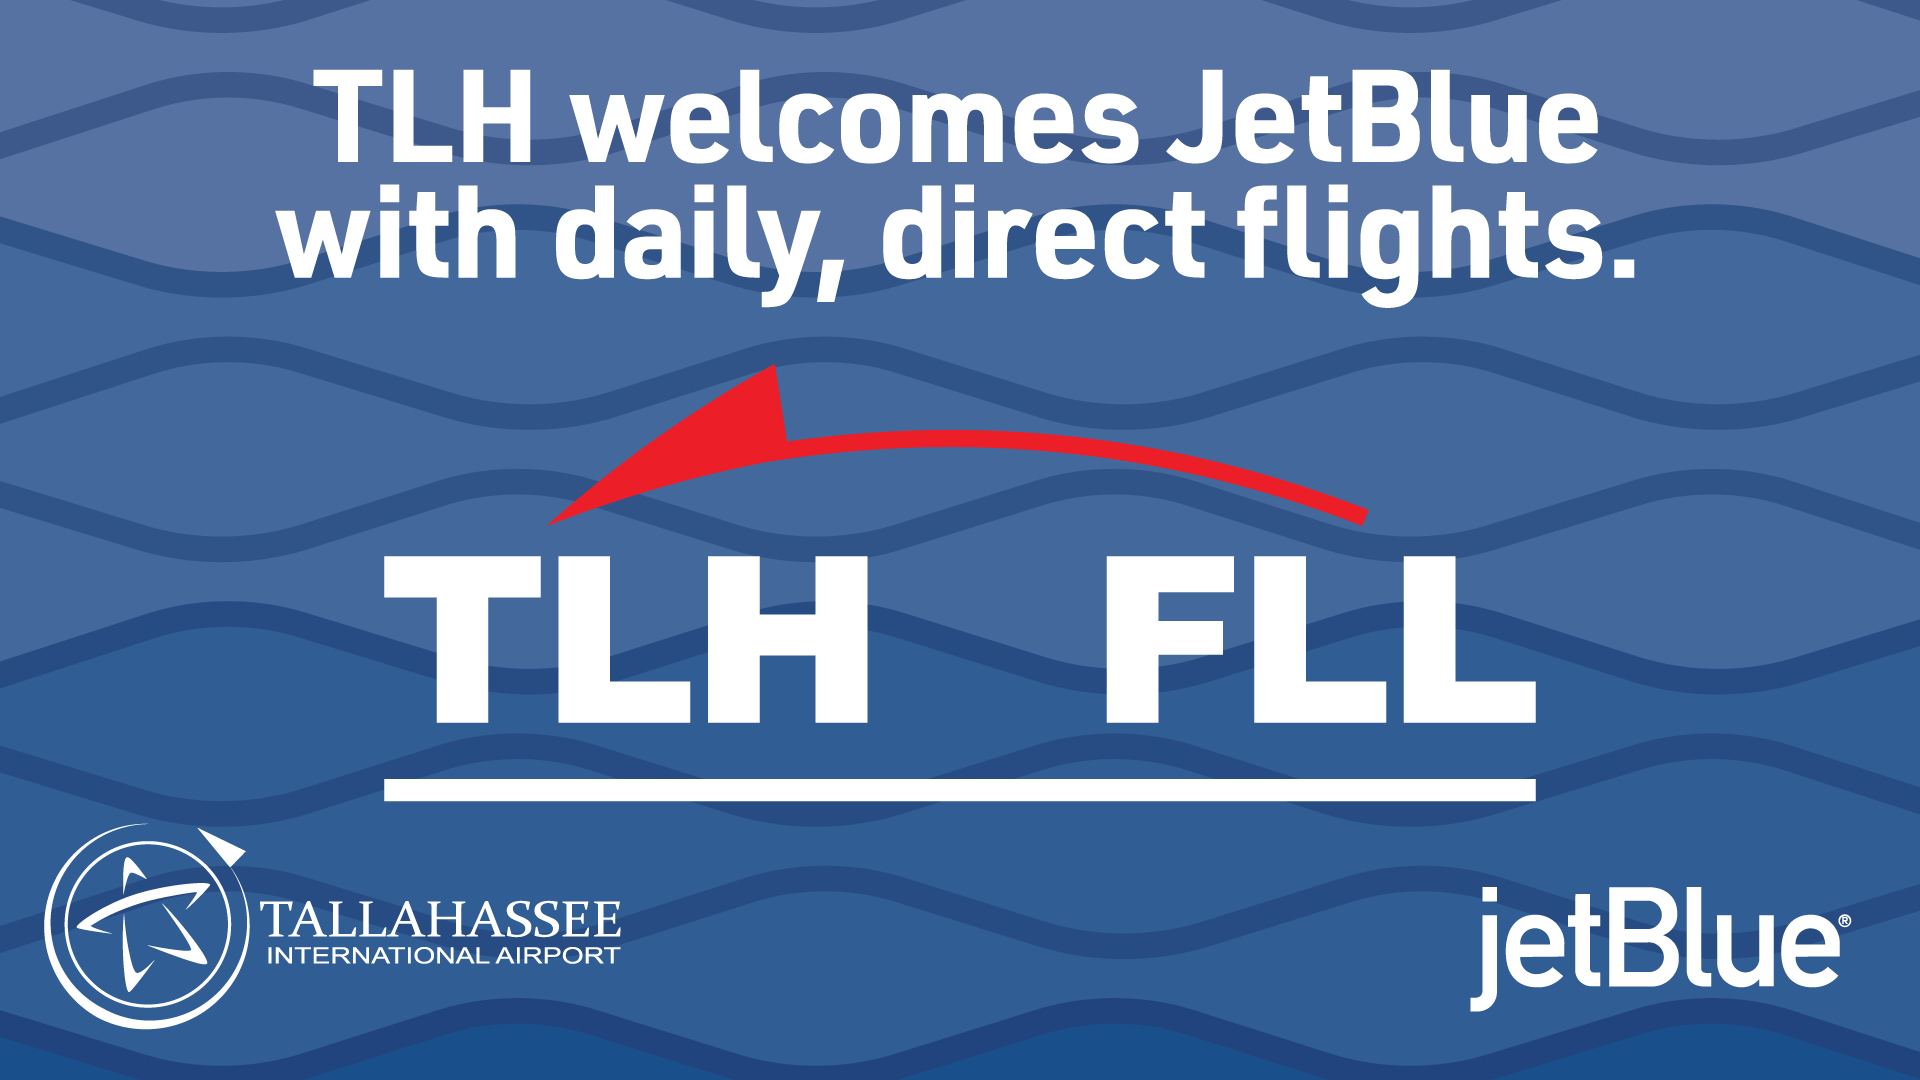 TLH welcomes JetBlue with daily, direct flights